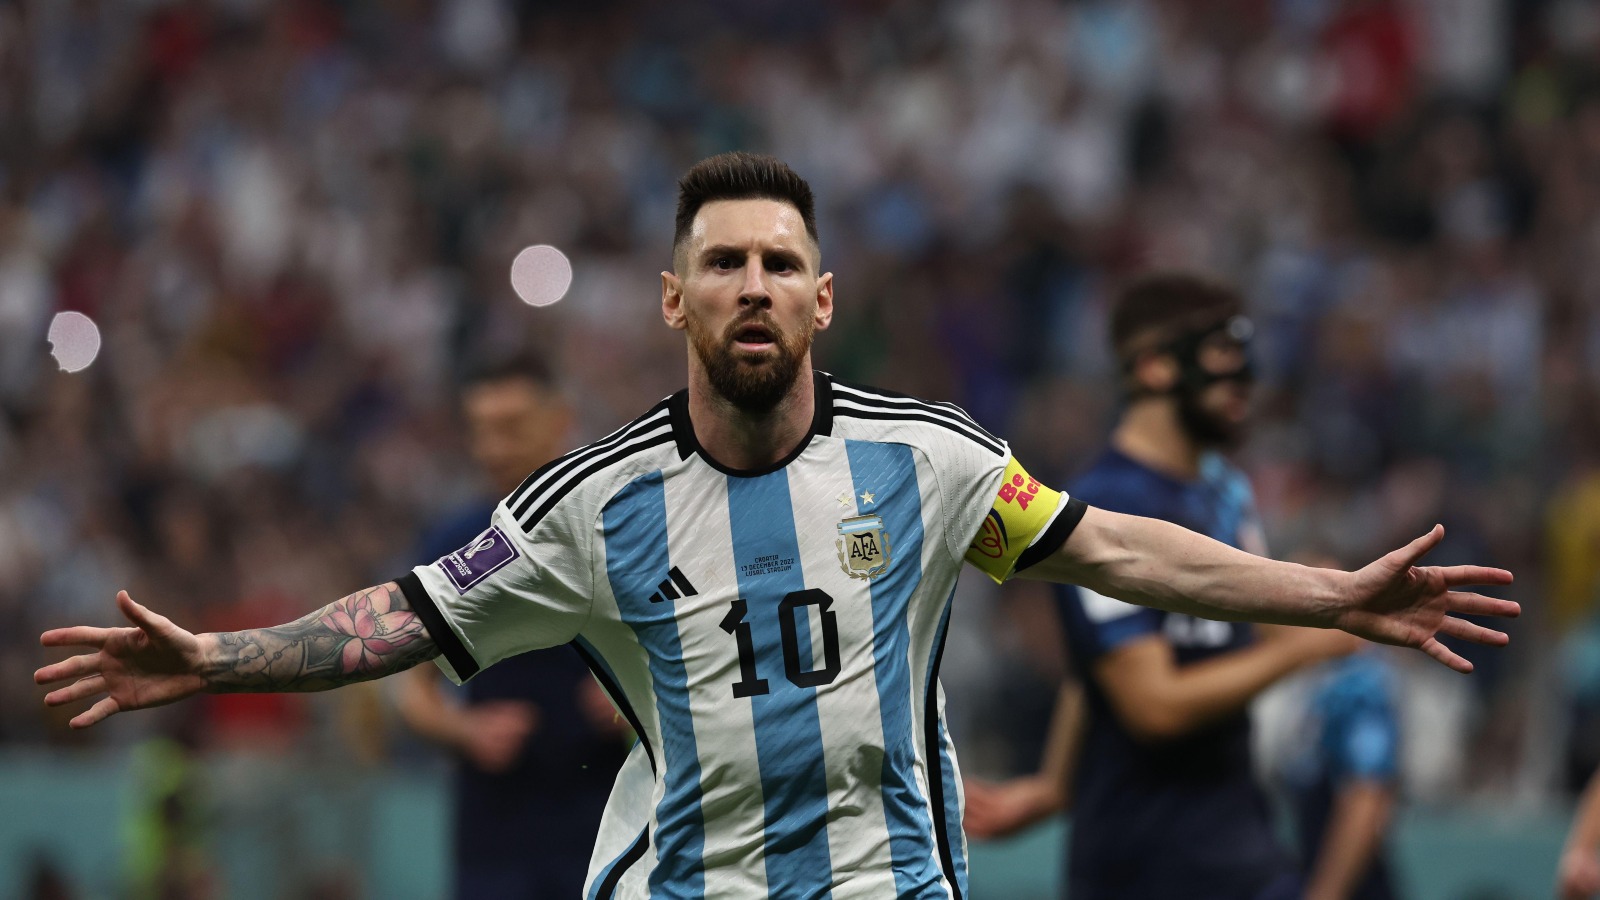 big names that want to see Lionel Messi lift the World Cup: Keane, Ronaldo, Modric